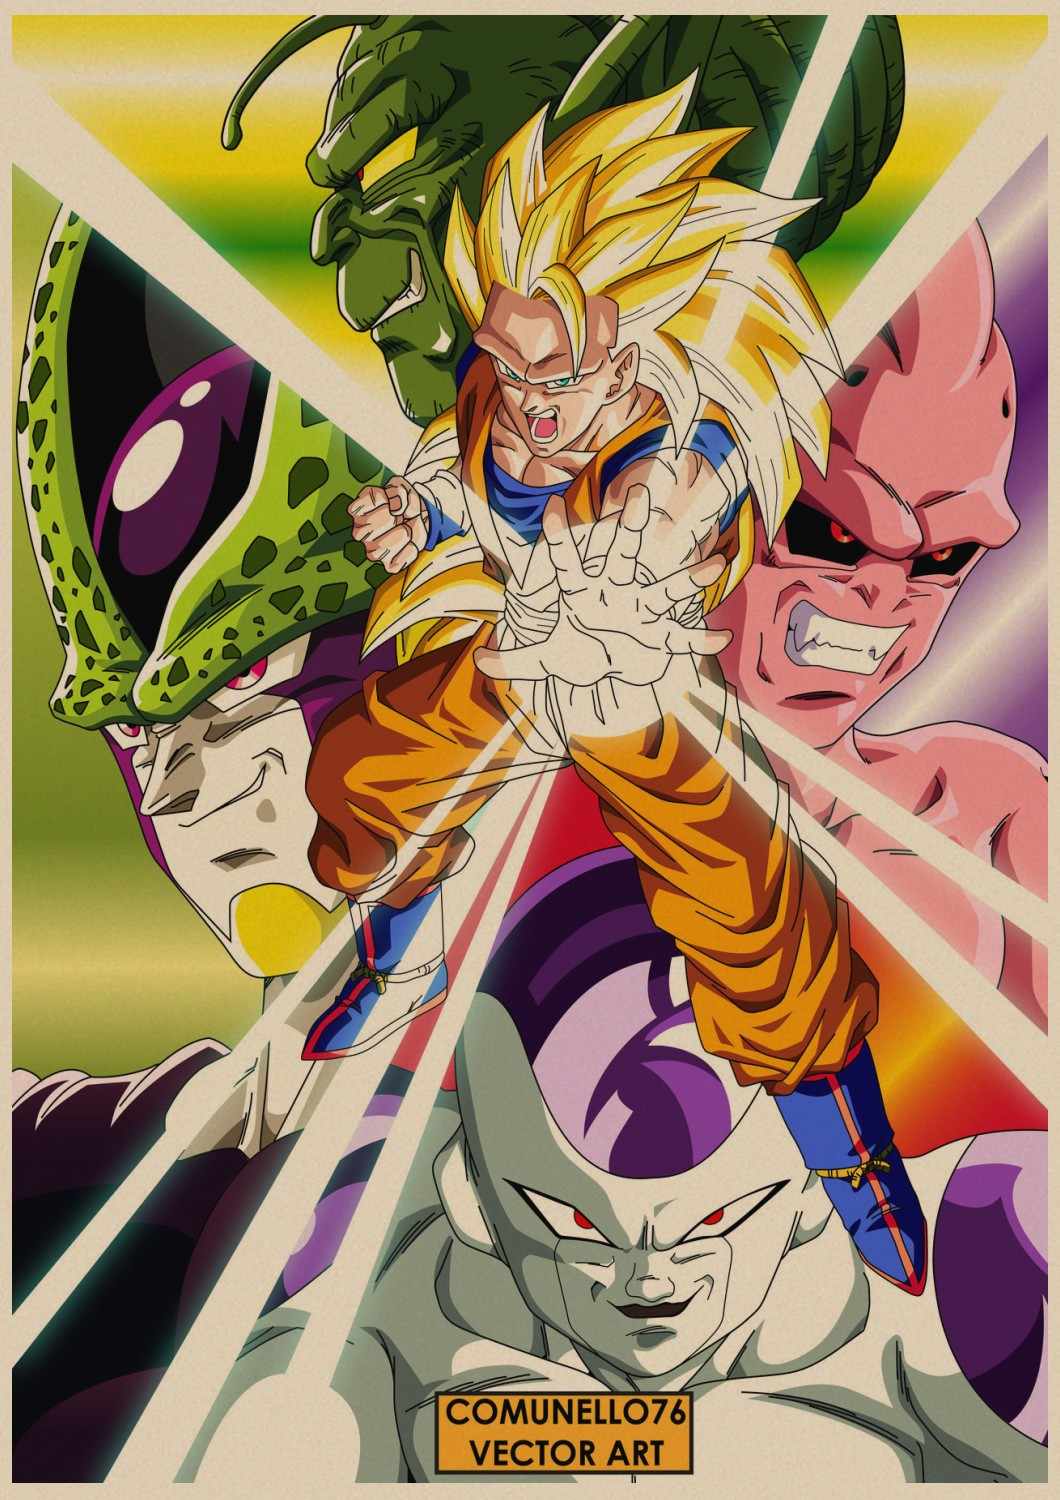 Manga Dragon Ball Z Posters Japanese Cartoon Wall Stickers Kraft Paper poster Cafe Creative wallpaper room decoration A4. Wall Stickers